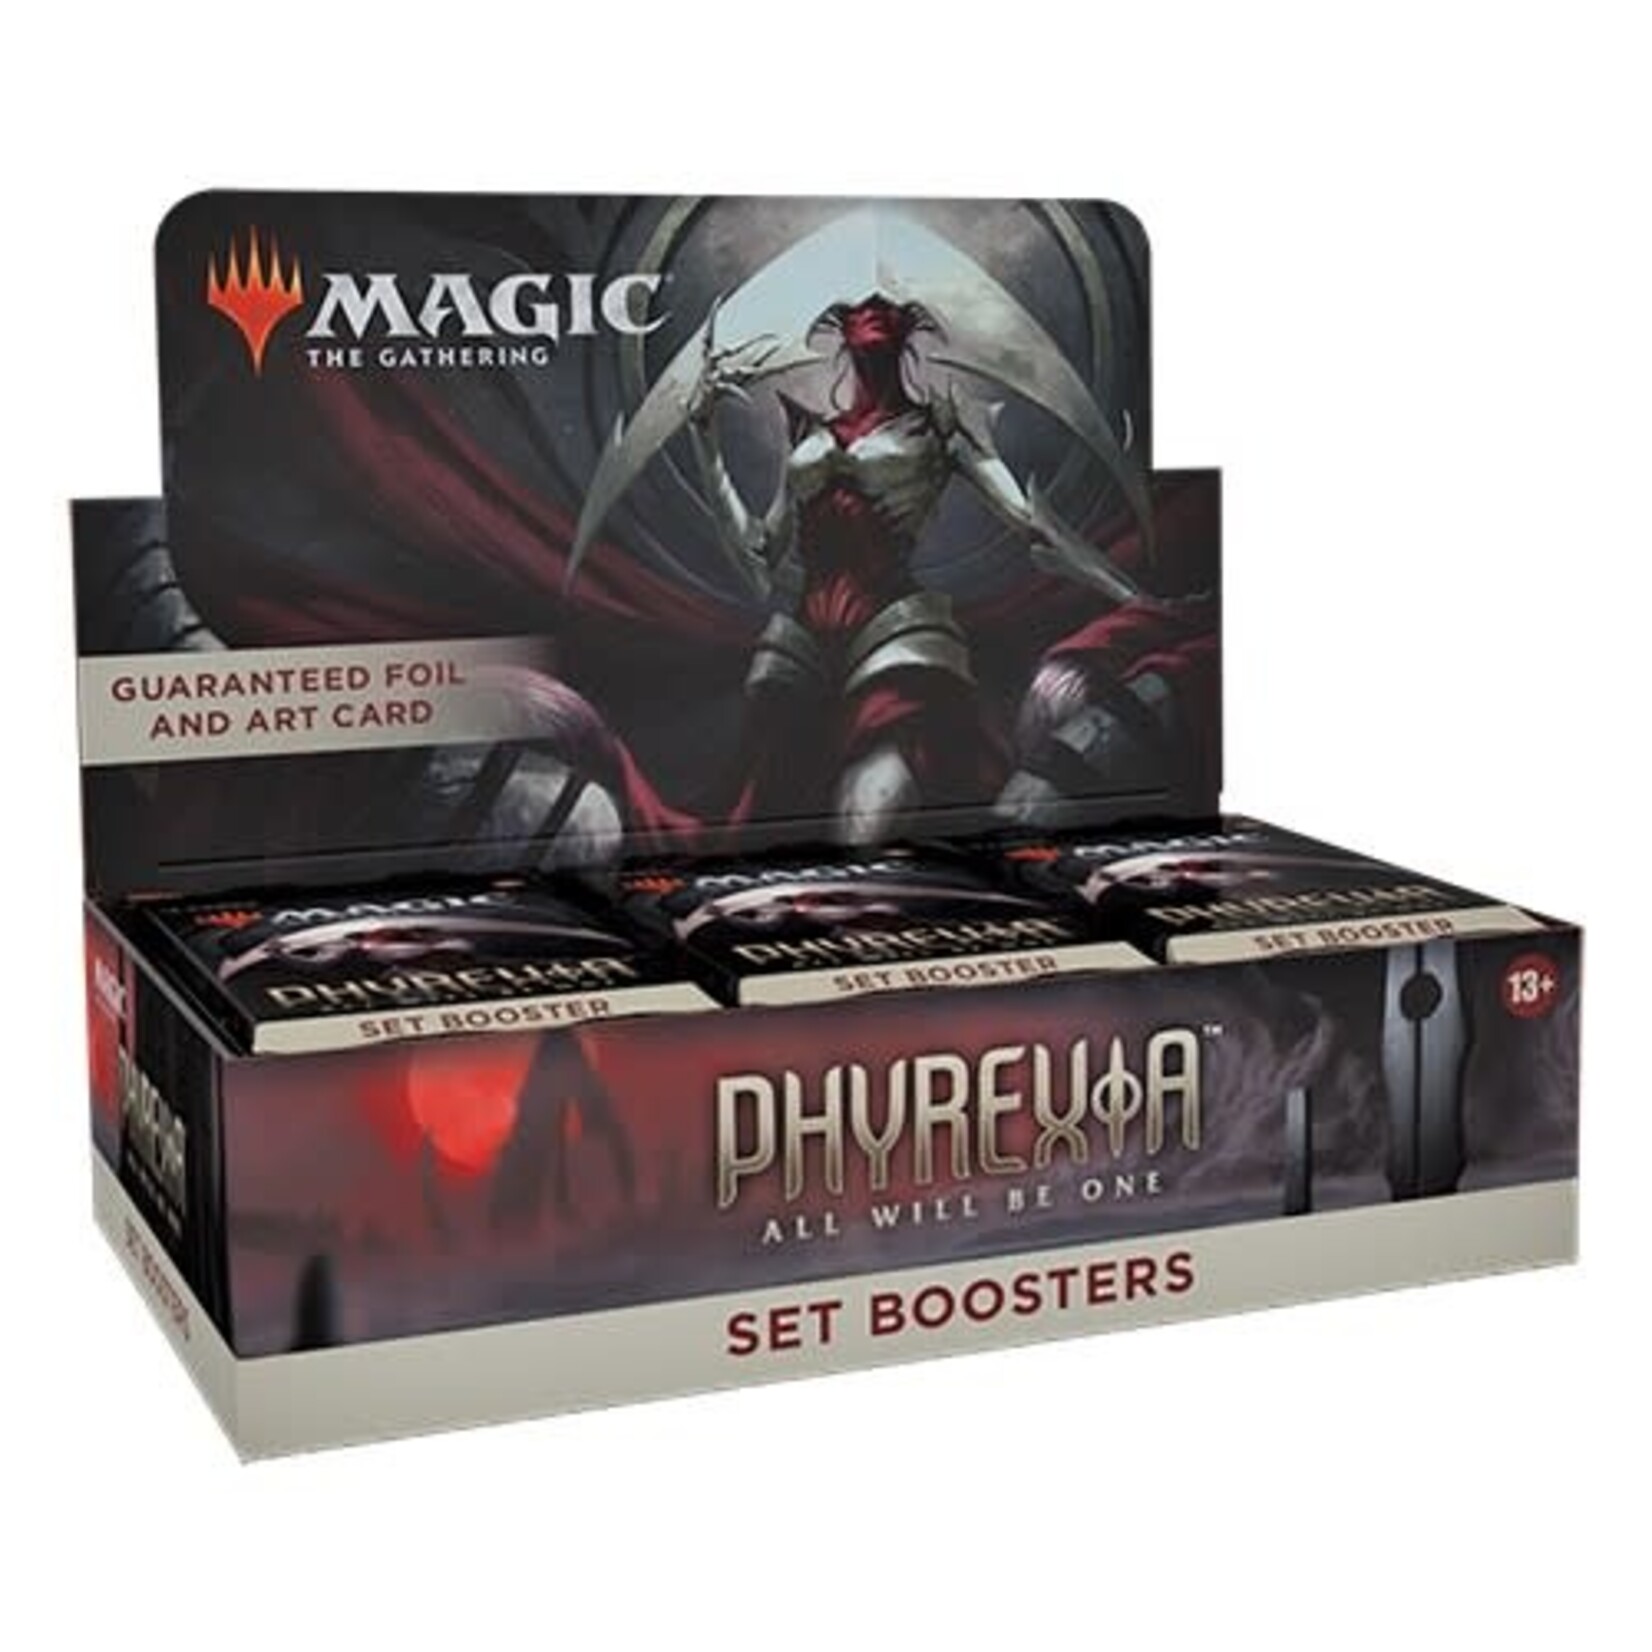 Magic the Gathering Magic: The Gathering - Phyrexia All Will Be One Set Booster